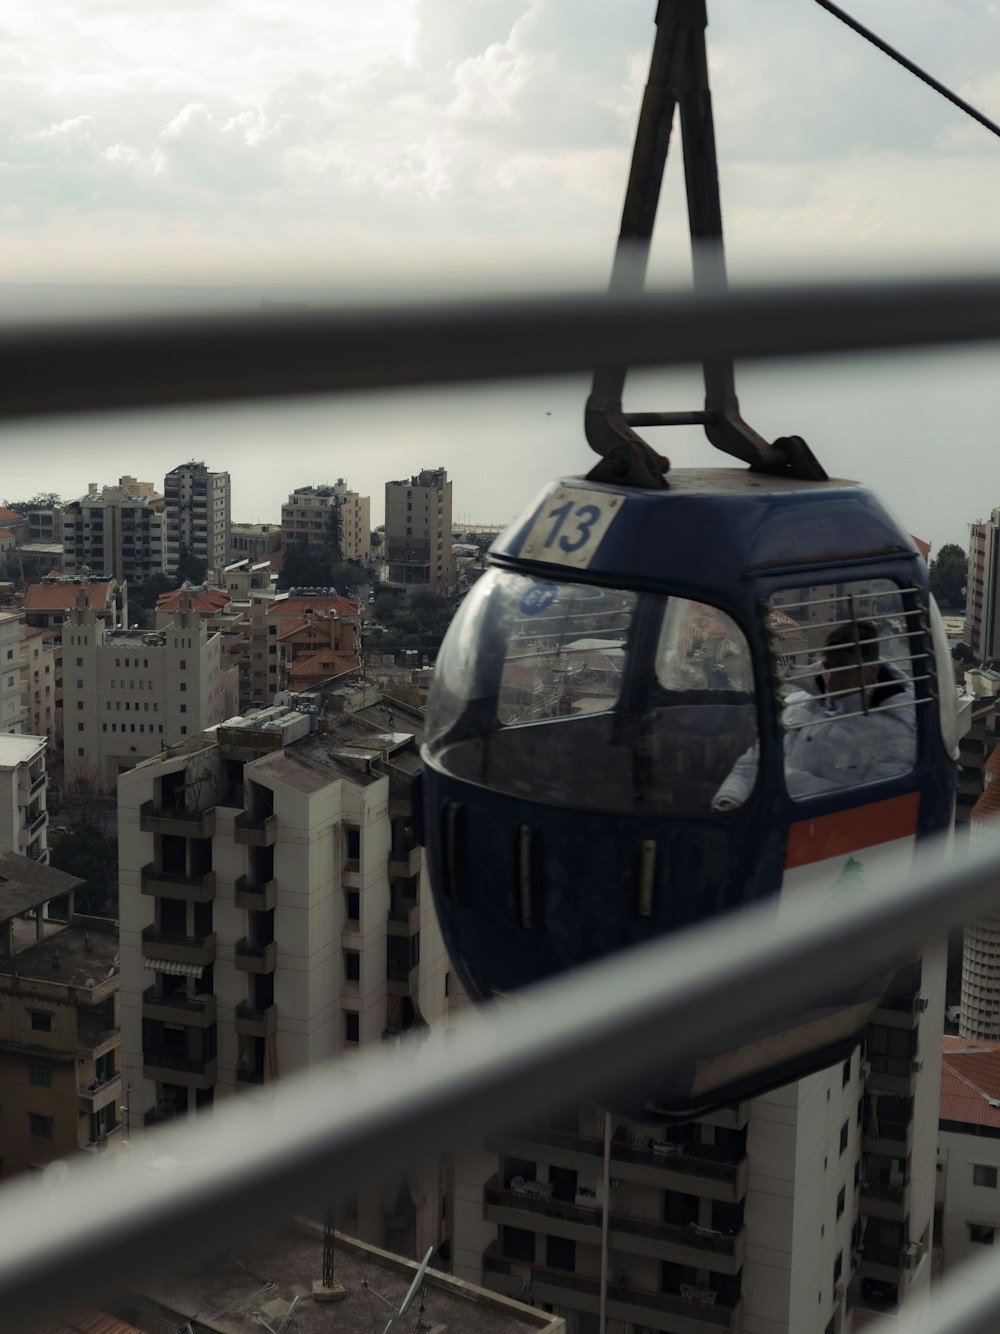 a cable car going over a city with tall buildings